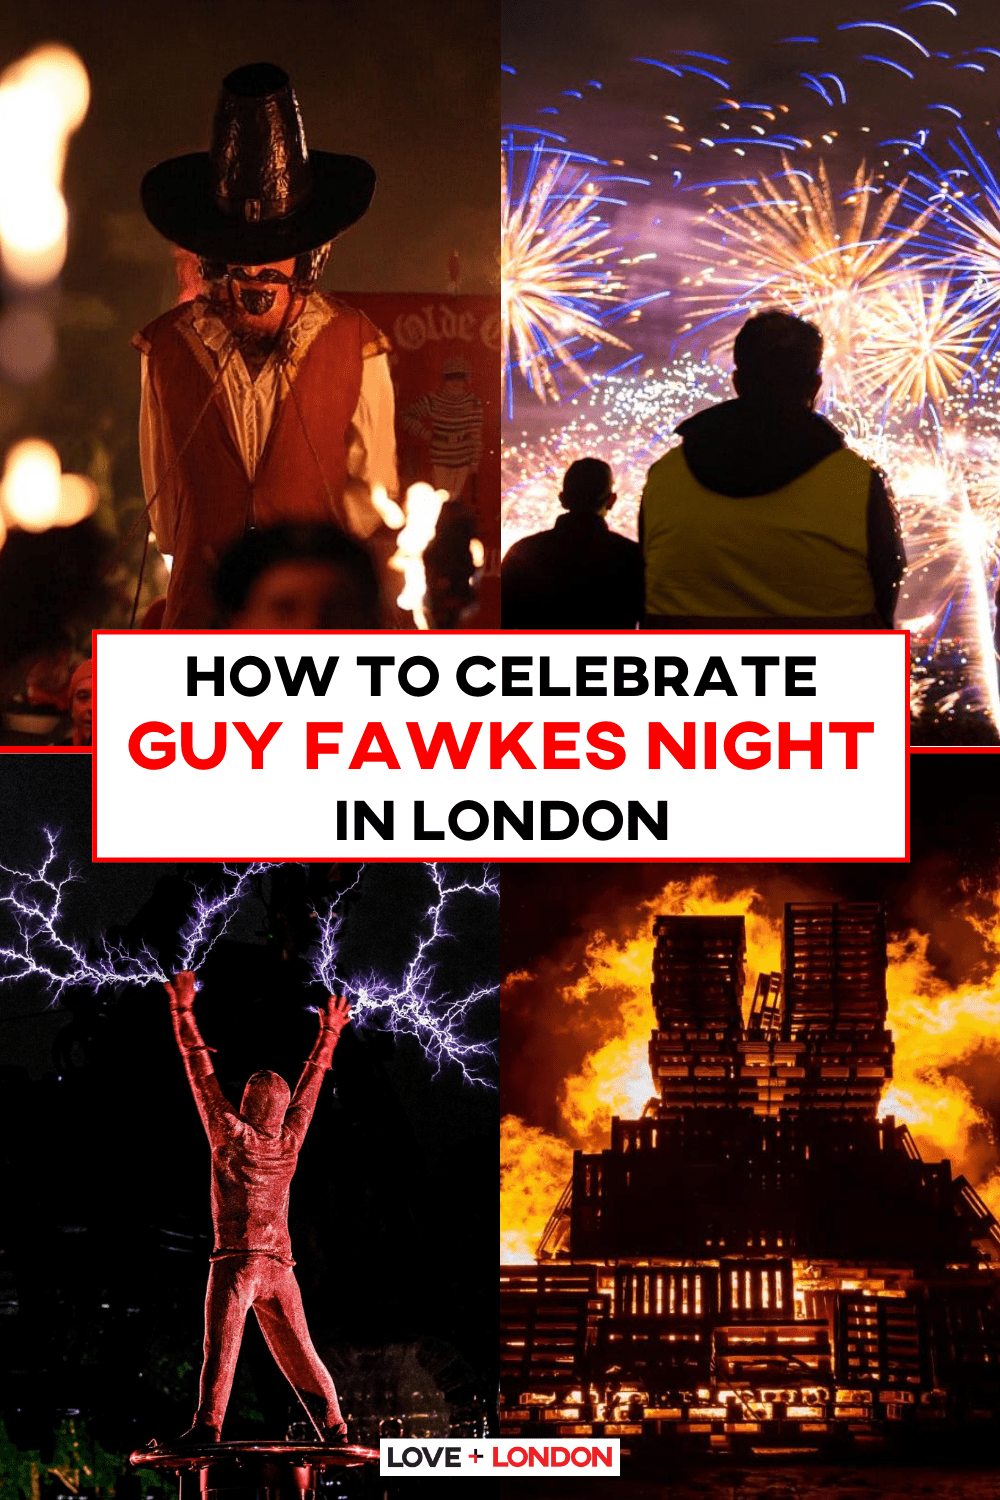 How to Celebrate Guy Fawkes Night in London